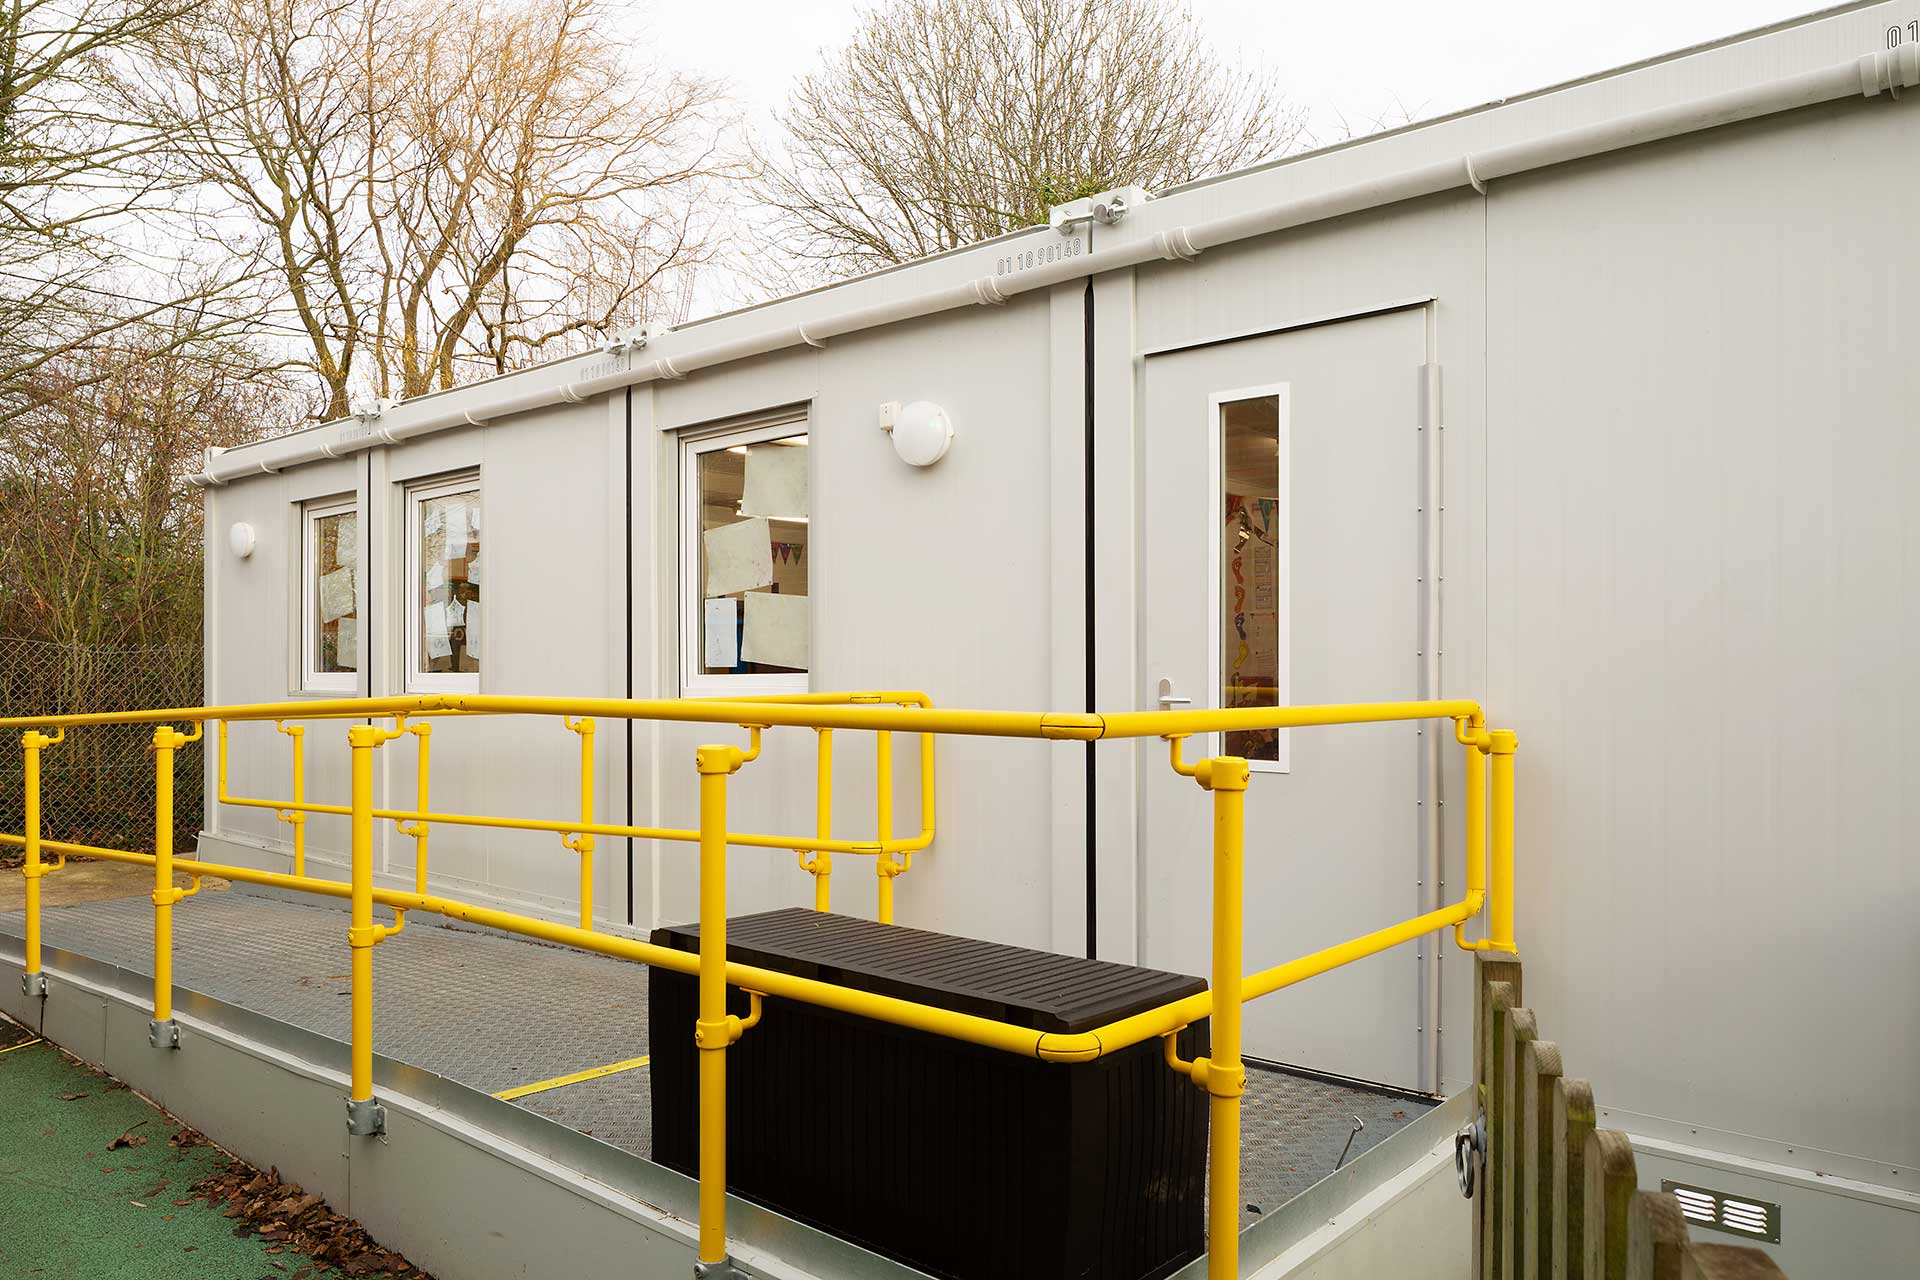 Euro Modular Building for Sale in the UK | Portable Space1920 x 1280